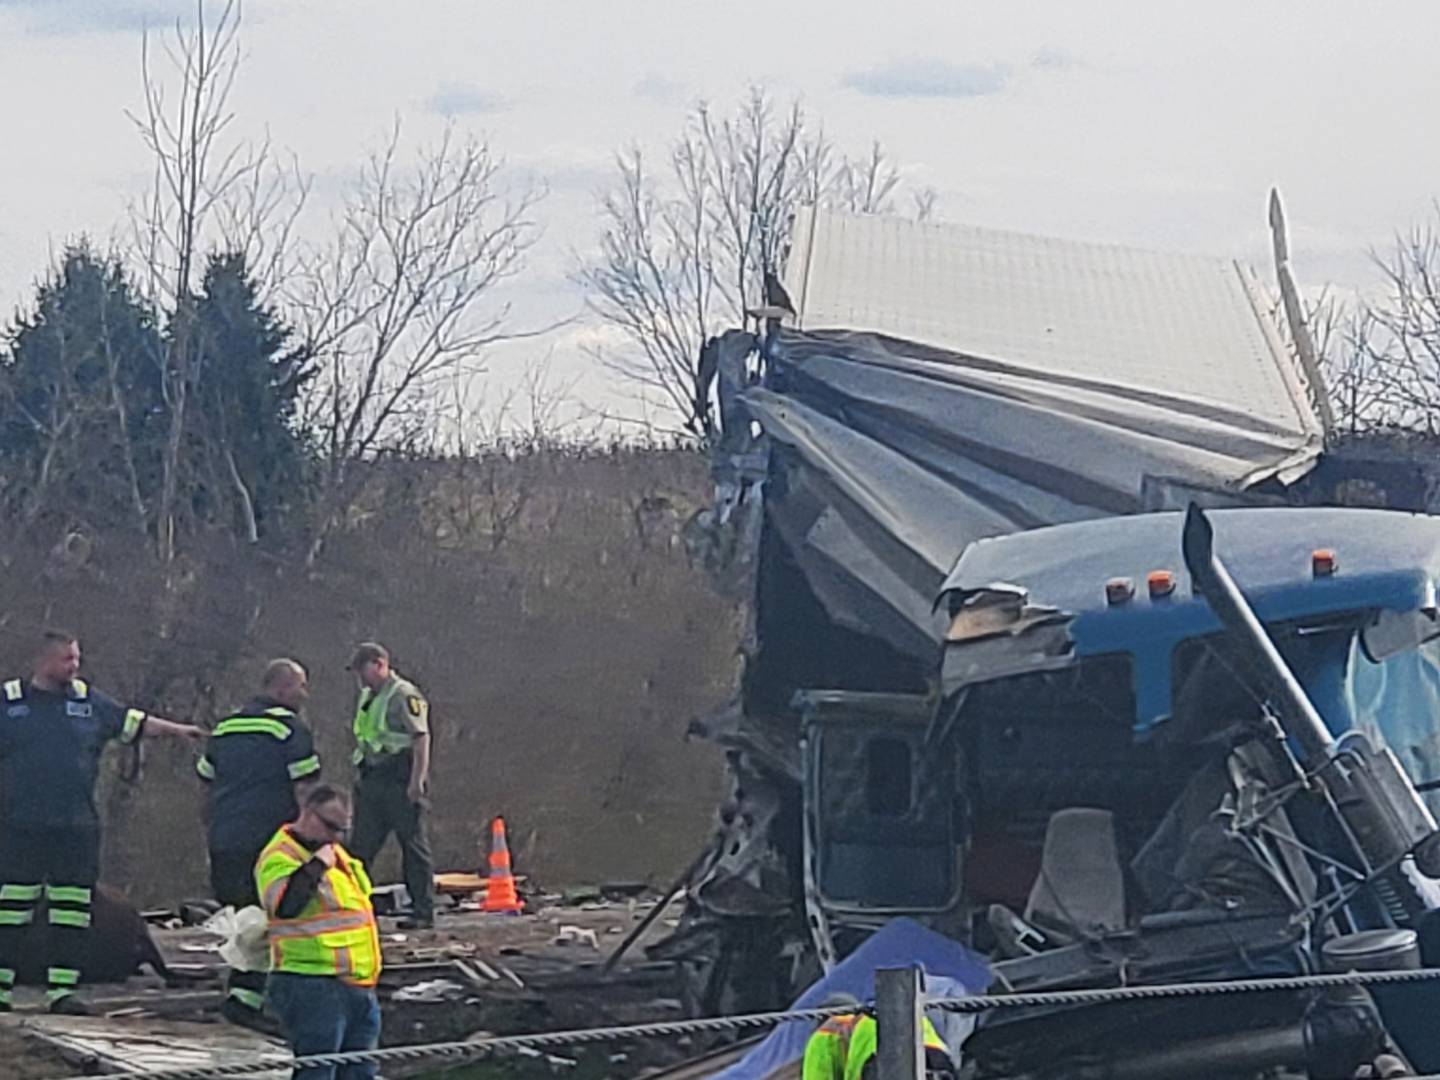 Cattle were loose Interstate 80, stopping eastbound lanes of traffic from Houbolt Road to Larkin Avenue, after a hauler was involved in a crash on Tuesday, April 19, 2022, Illinois State Police said.
(Photos courtesy of Michel Uylako)